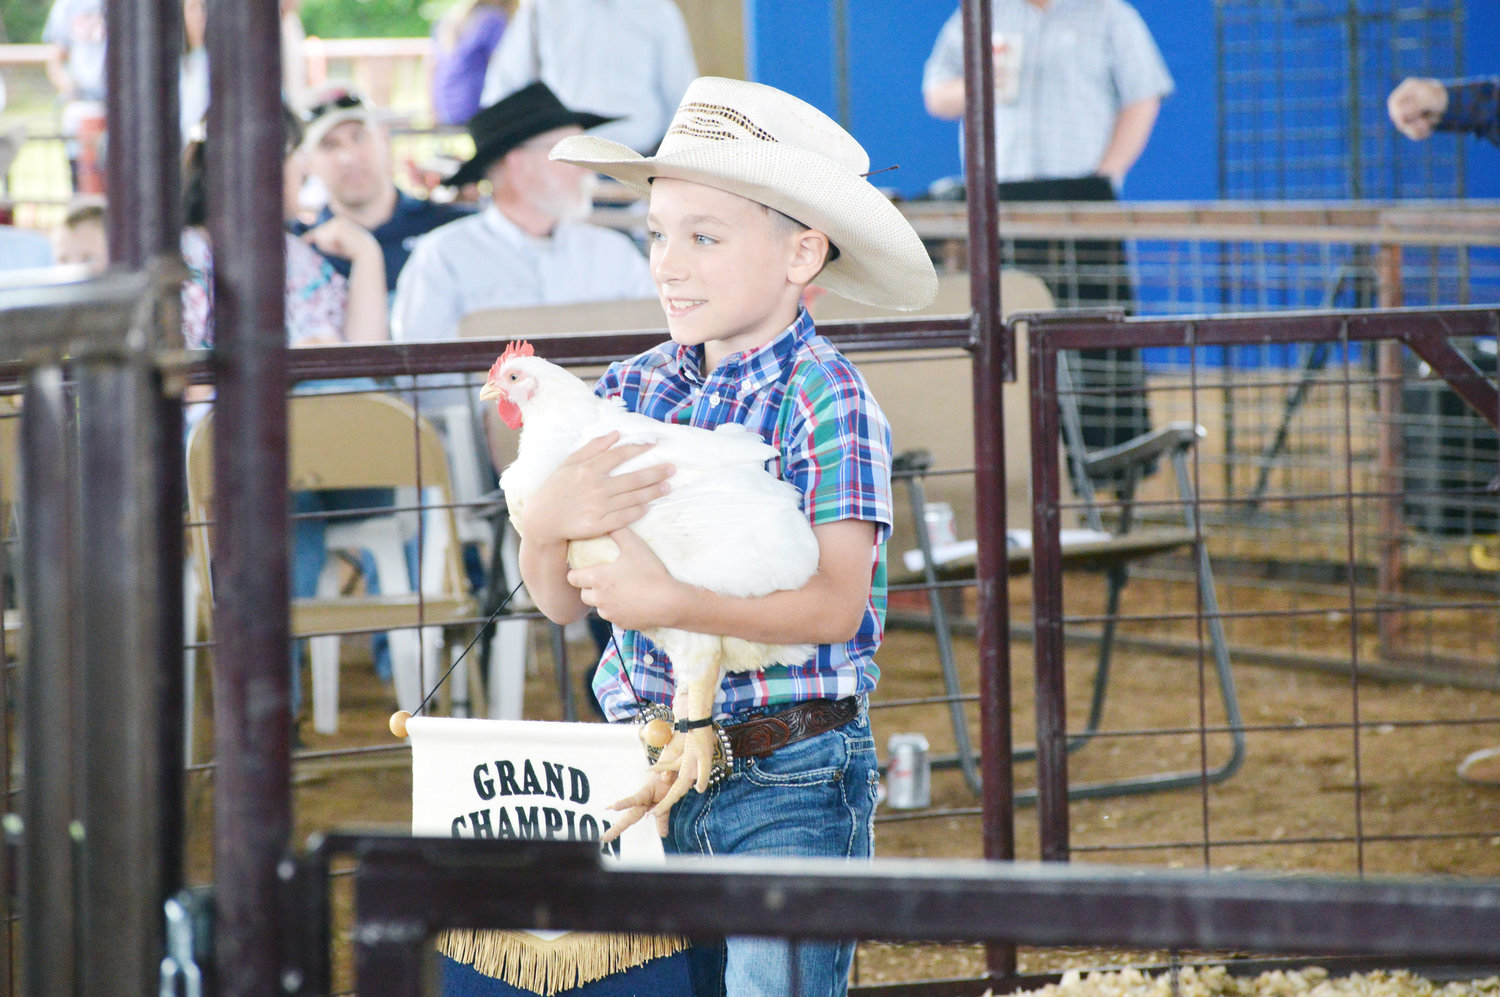 Will Louderman of Wood County 4H had the Grand Champion Broiler at the 2017 Wood County Junior Livestock Show held last week in Winnsboro. His broiler was bought by City National Bank for $1,200. A